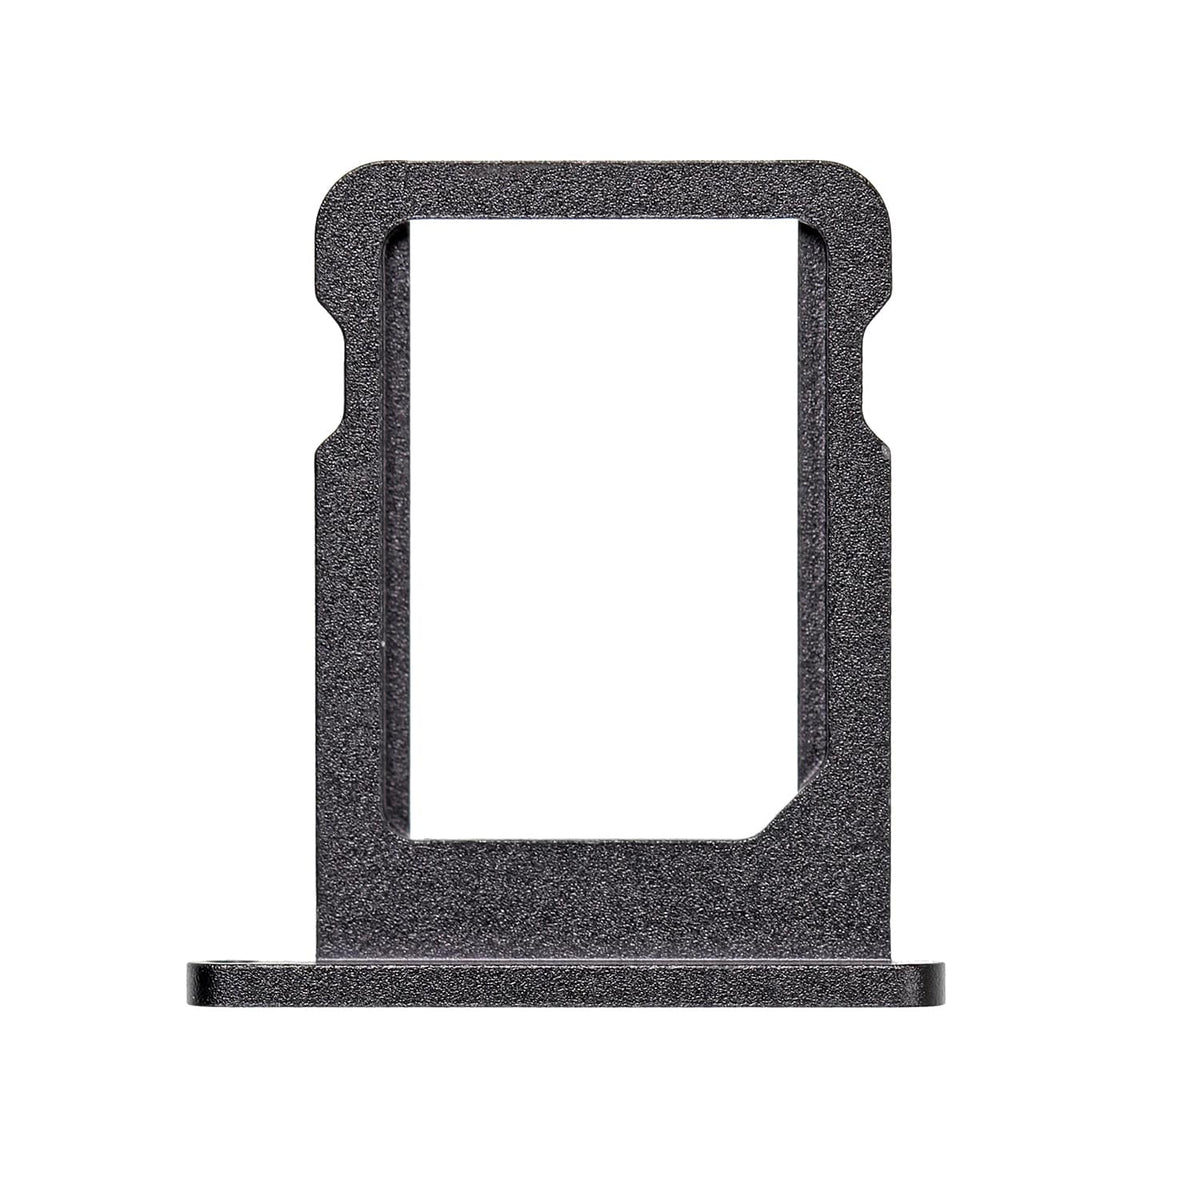 SIM CARD TRAY FOR IPAD PRO 12.9 4TH - SPACE GRAY